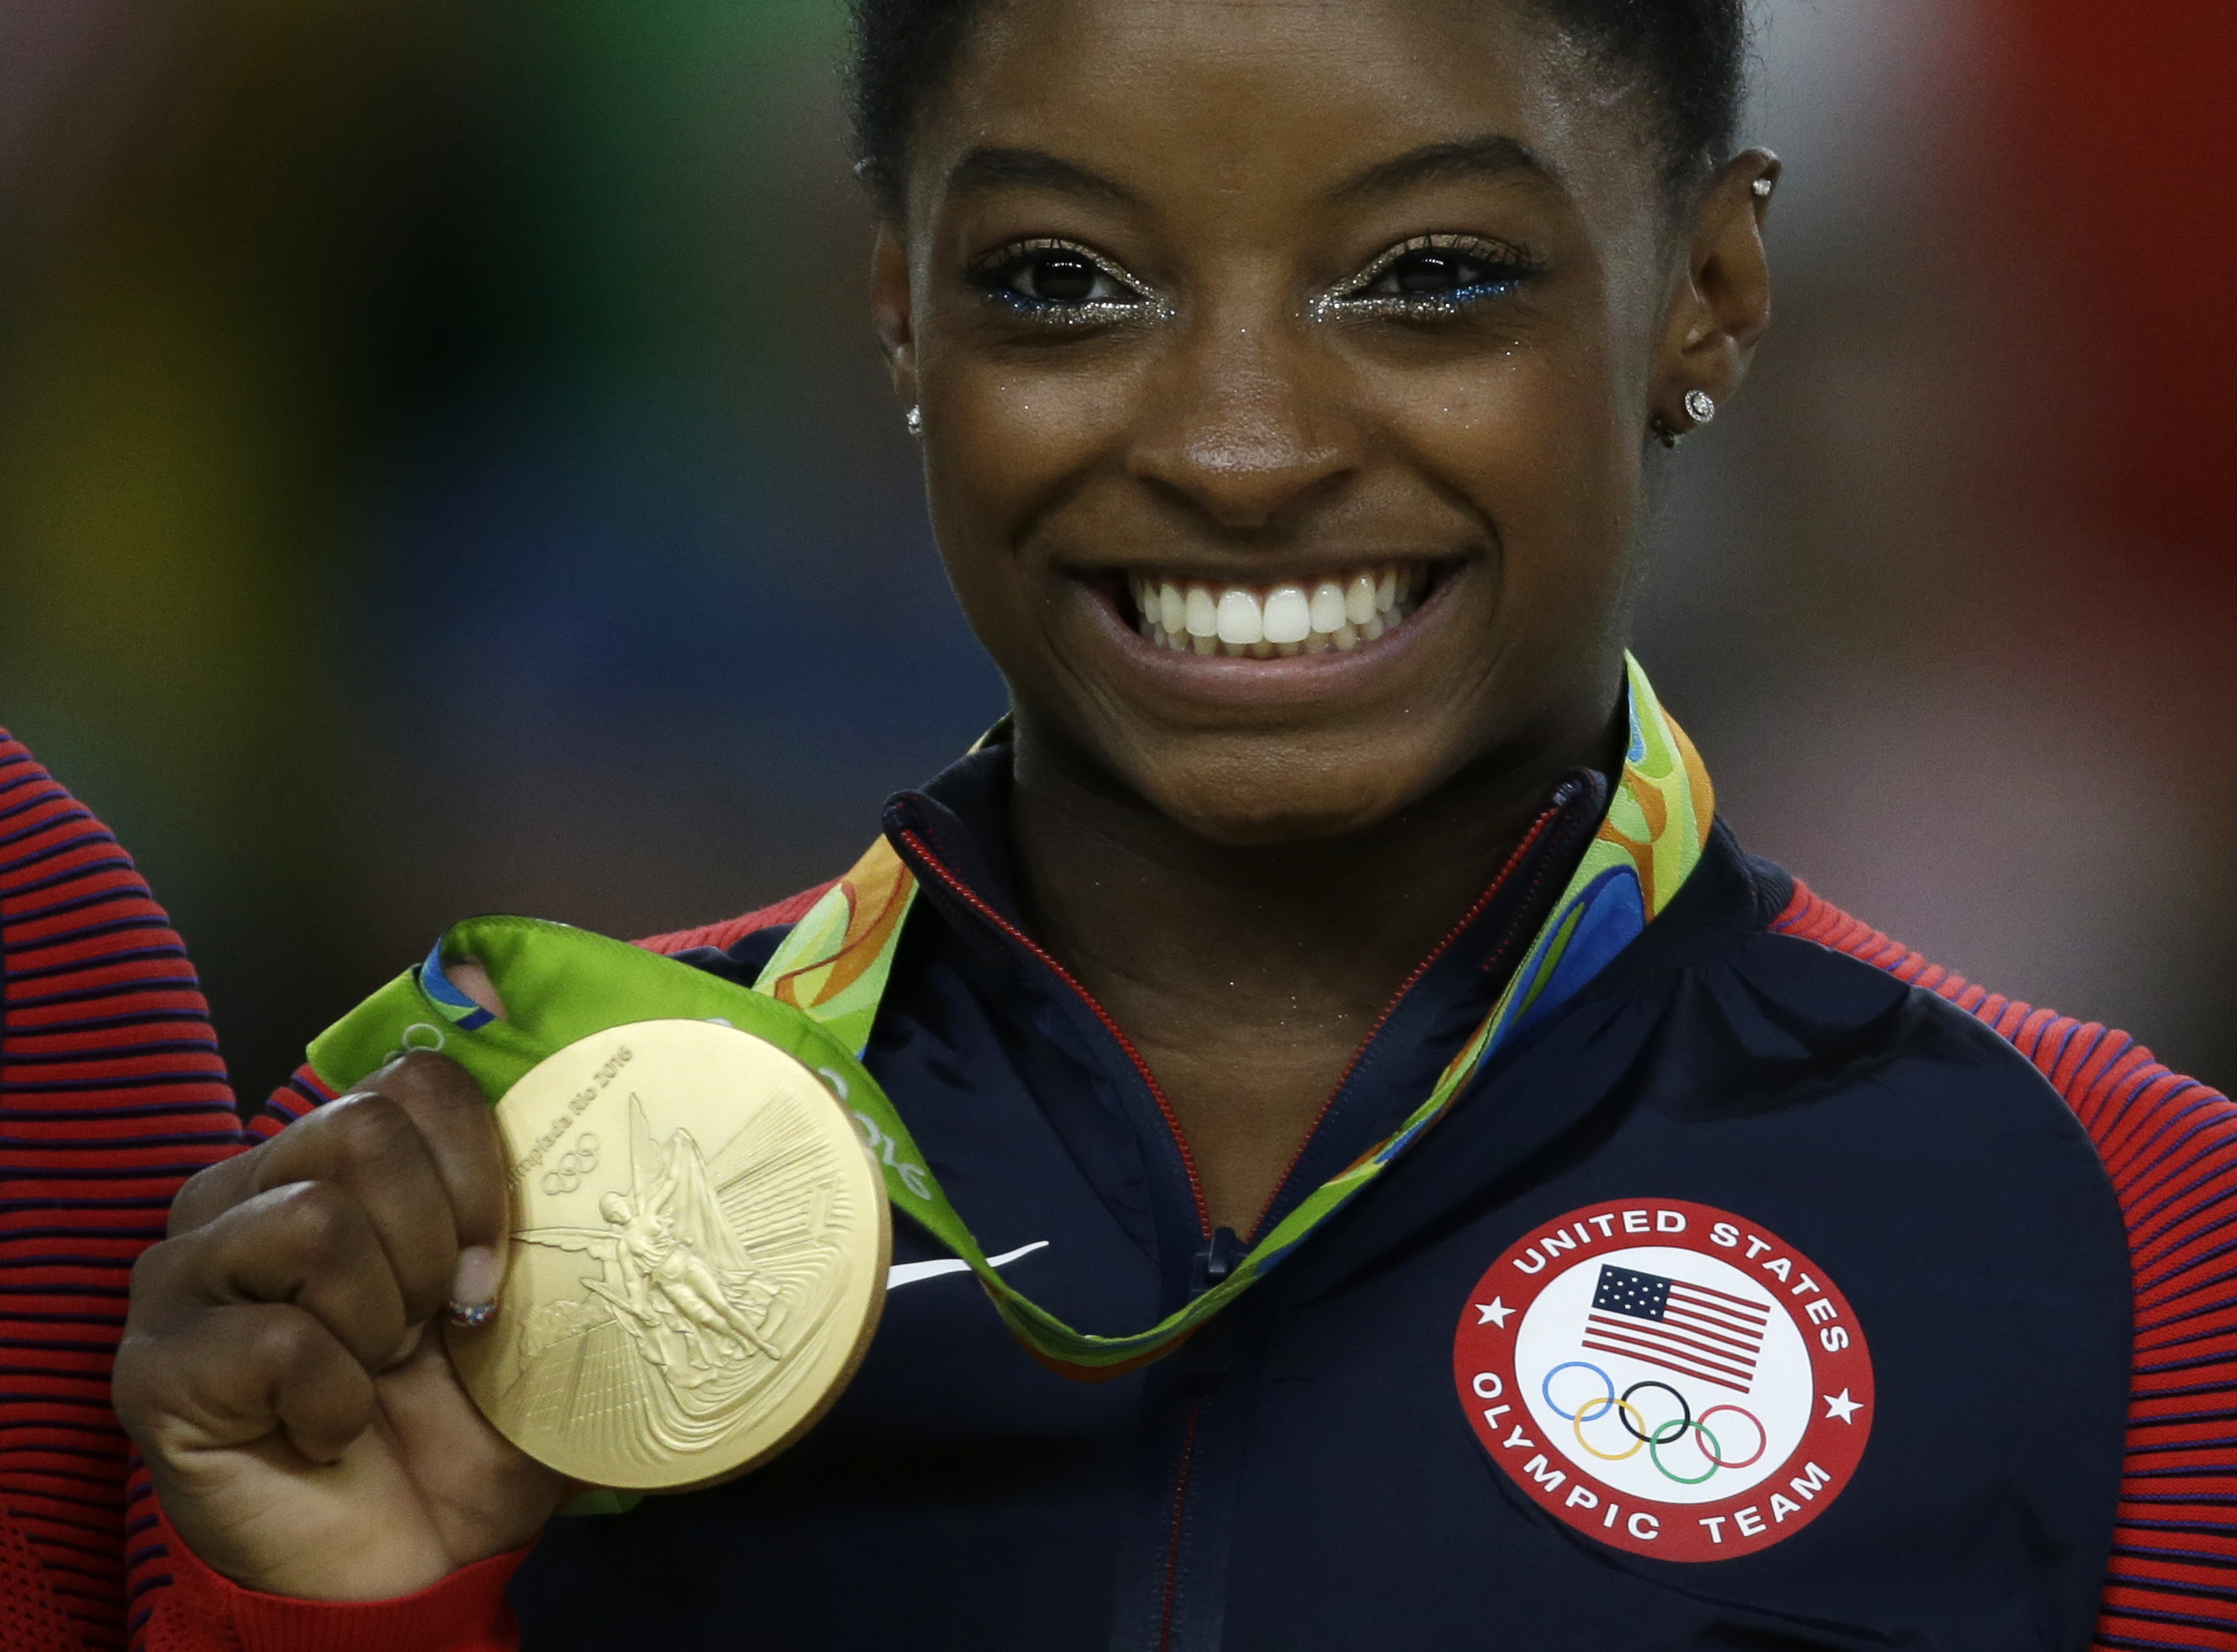 Simone Biles Olympic Gold Medals / Biles caps her Olympics with 4th